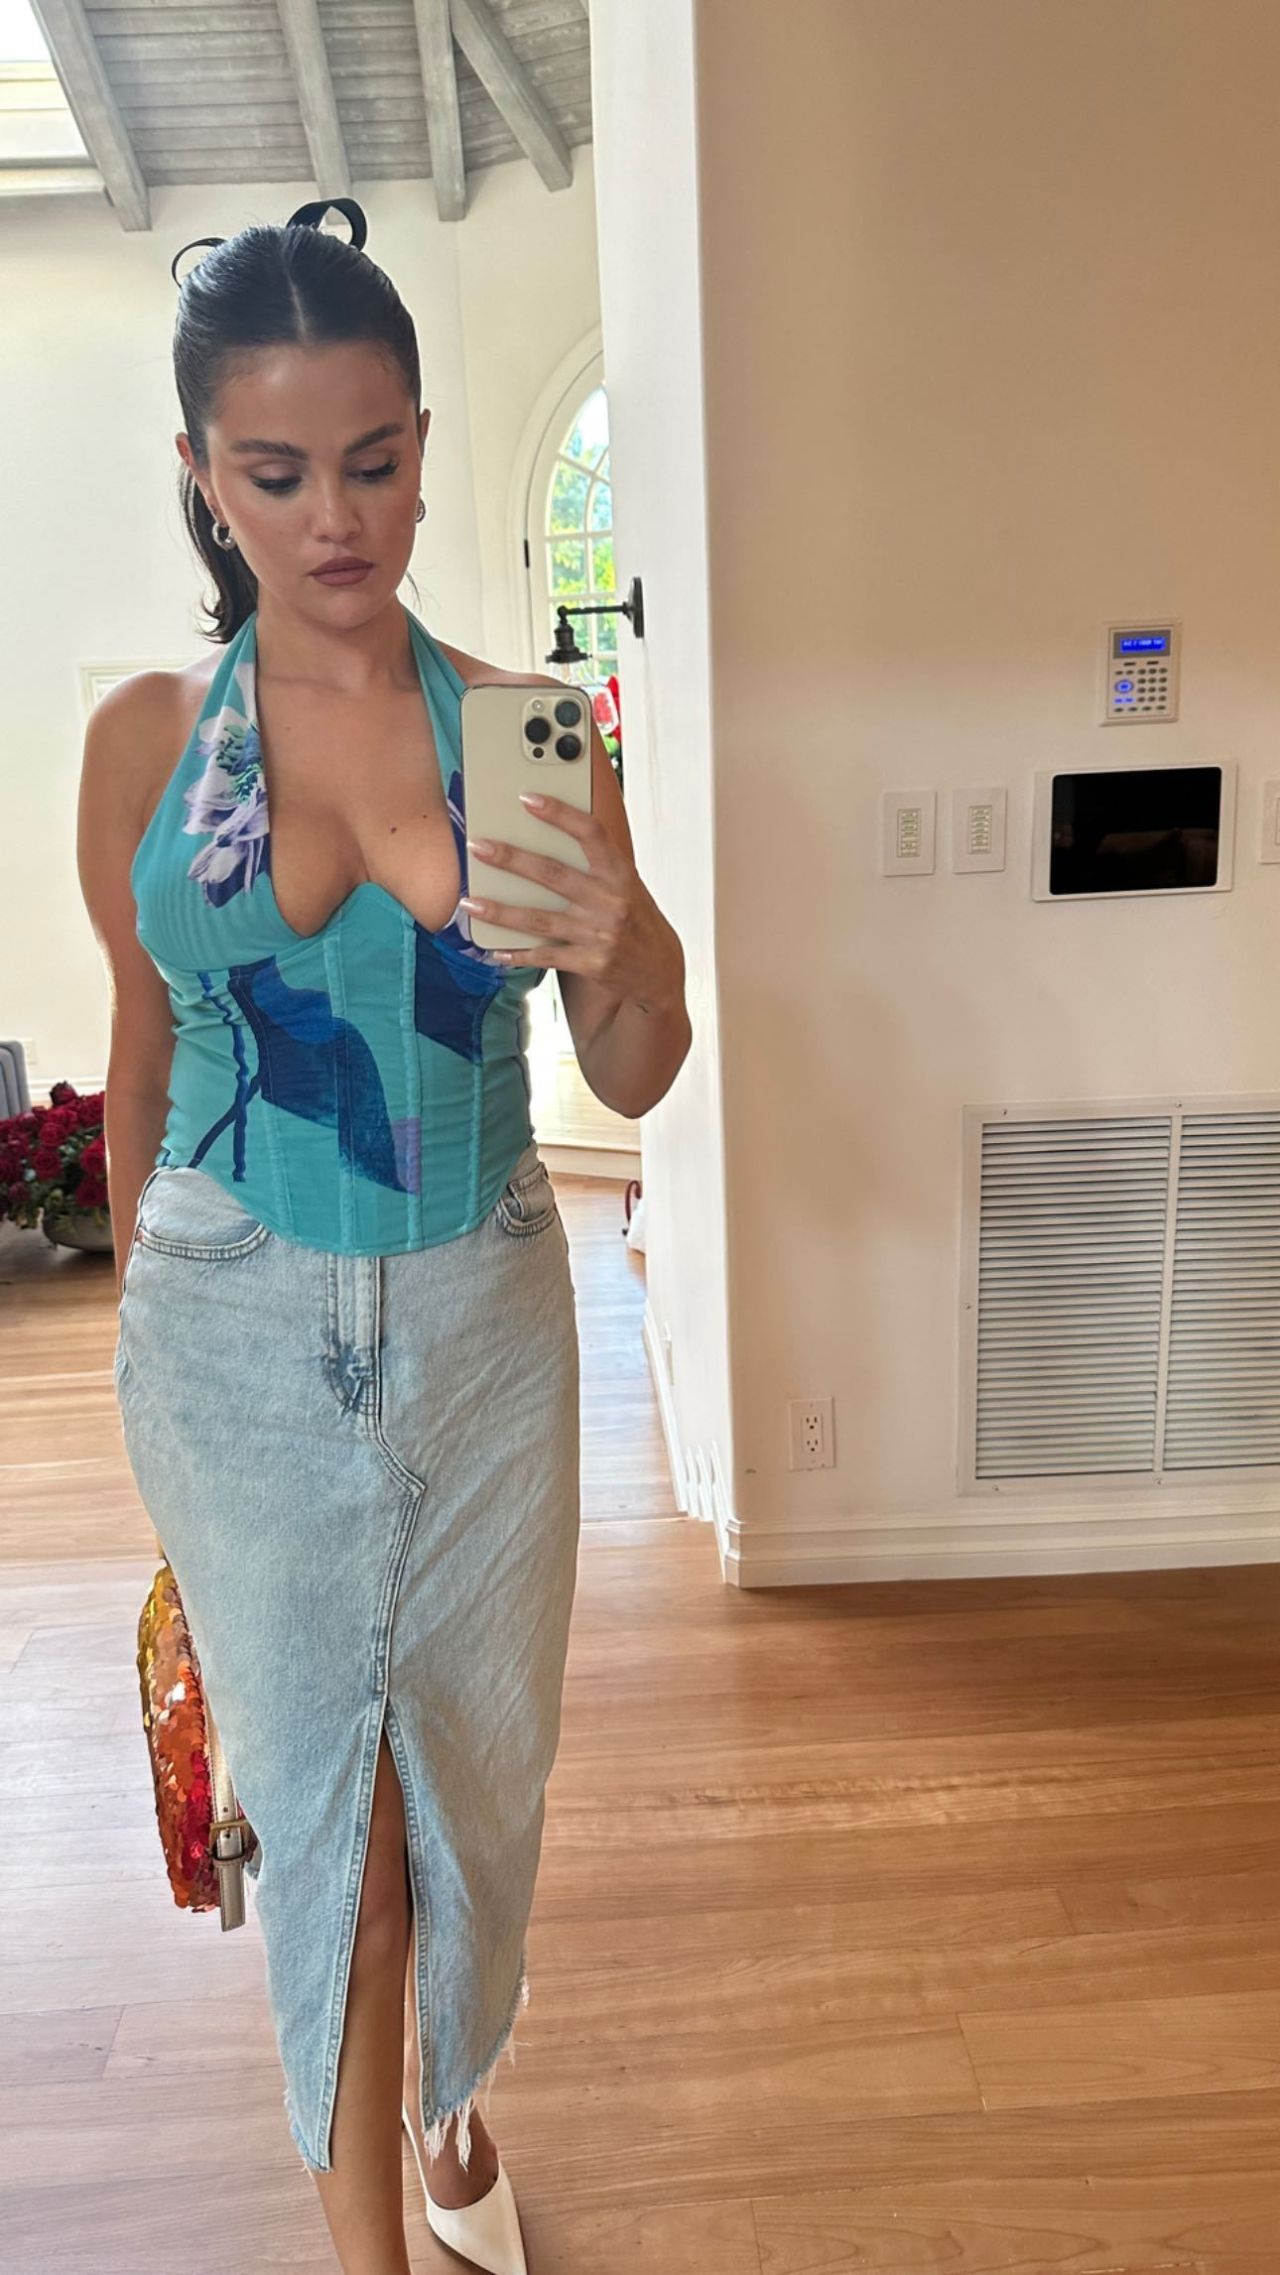 Sizzling Sexy Selena Gomez Selfie, BIG TITS and Cleavage Hanging Out